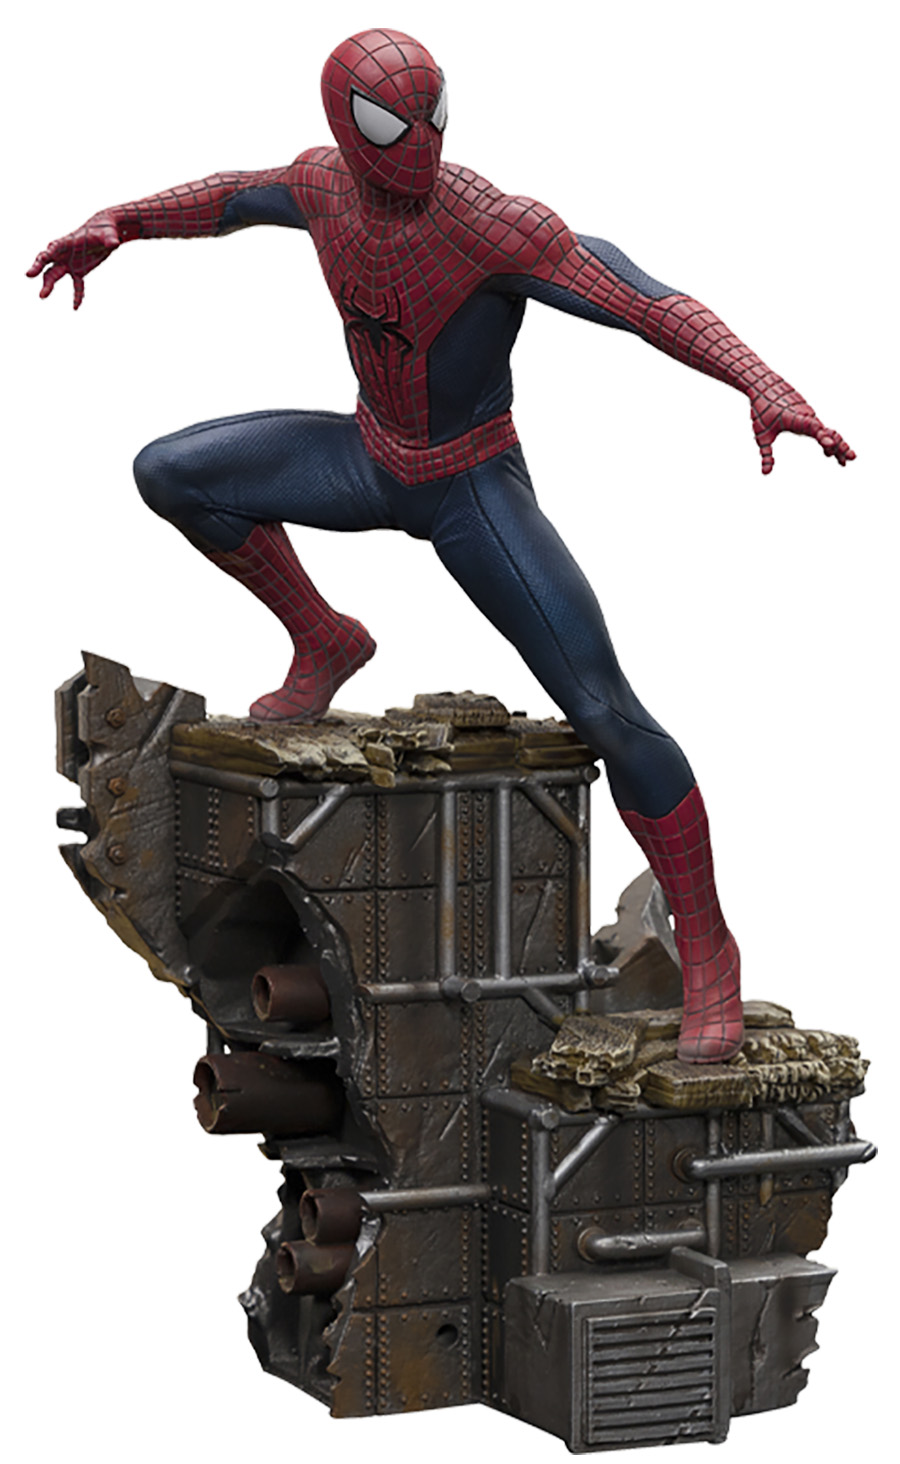 Spider-Man Peter #3 1/10 Scale Statue